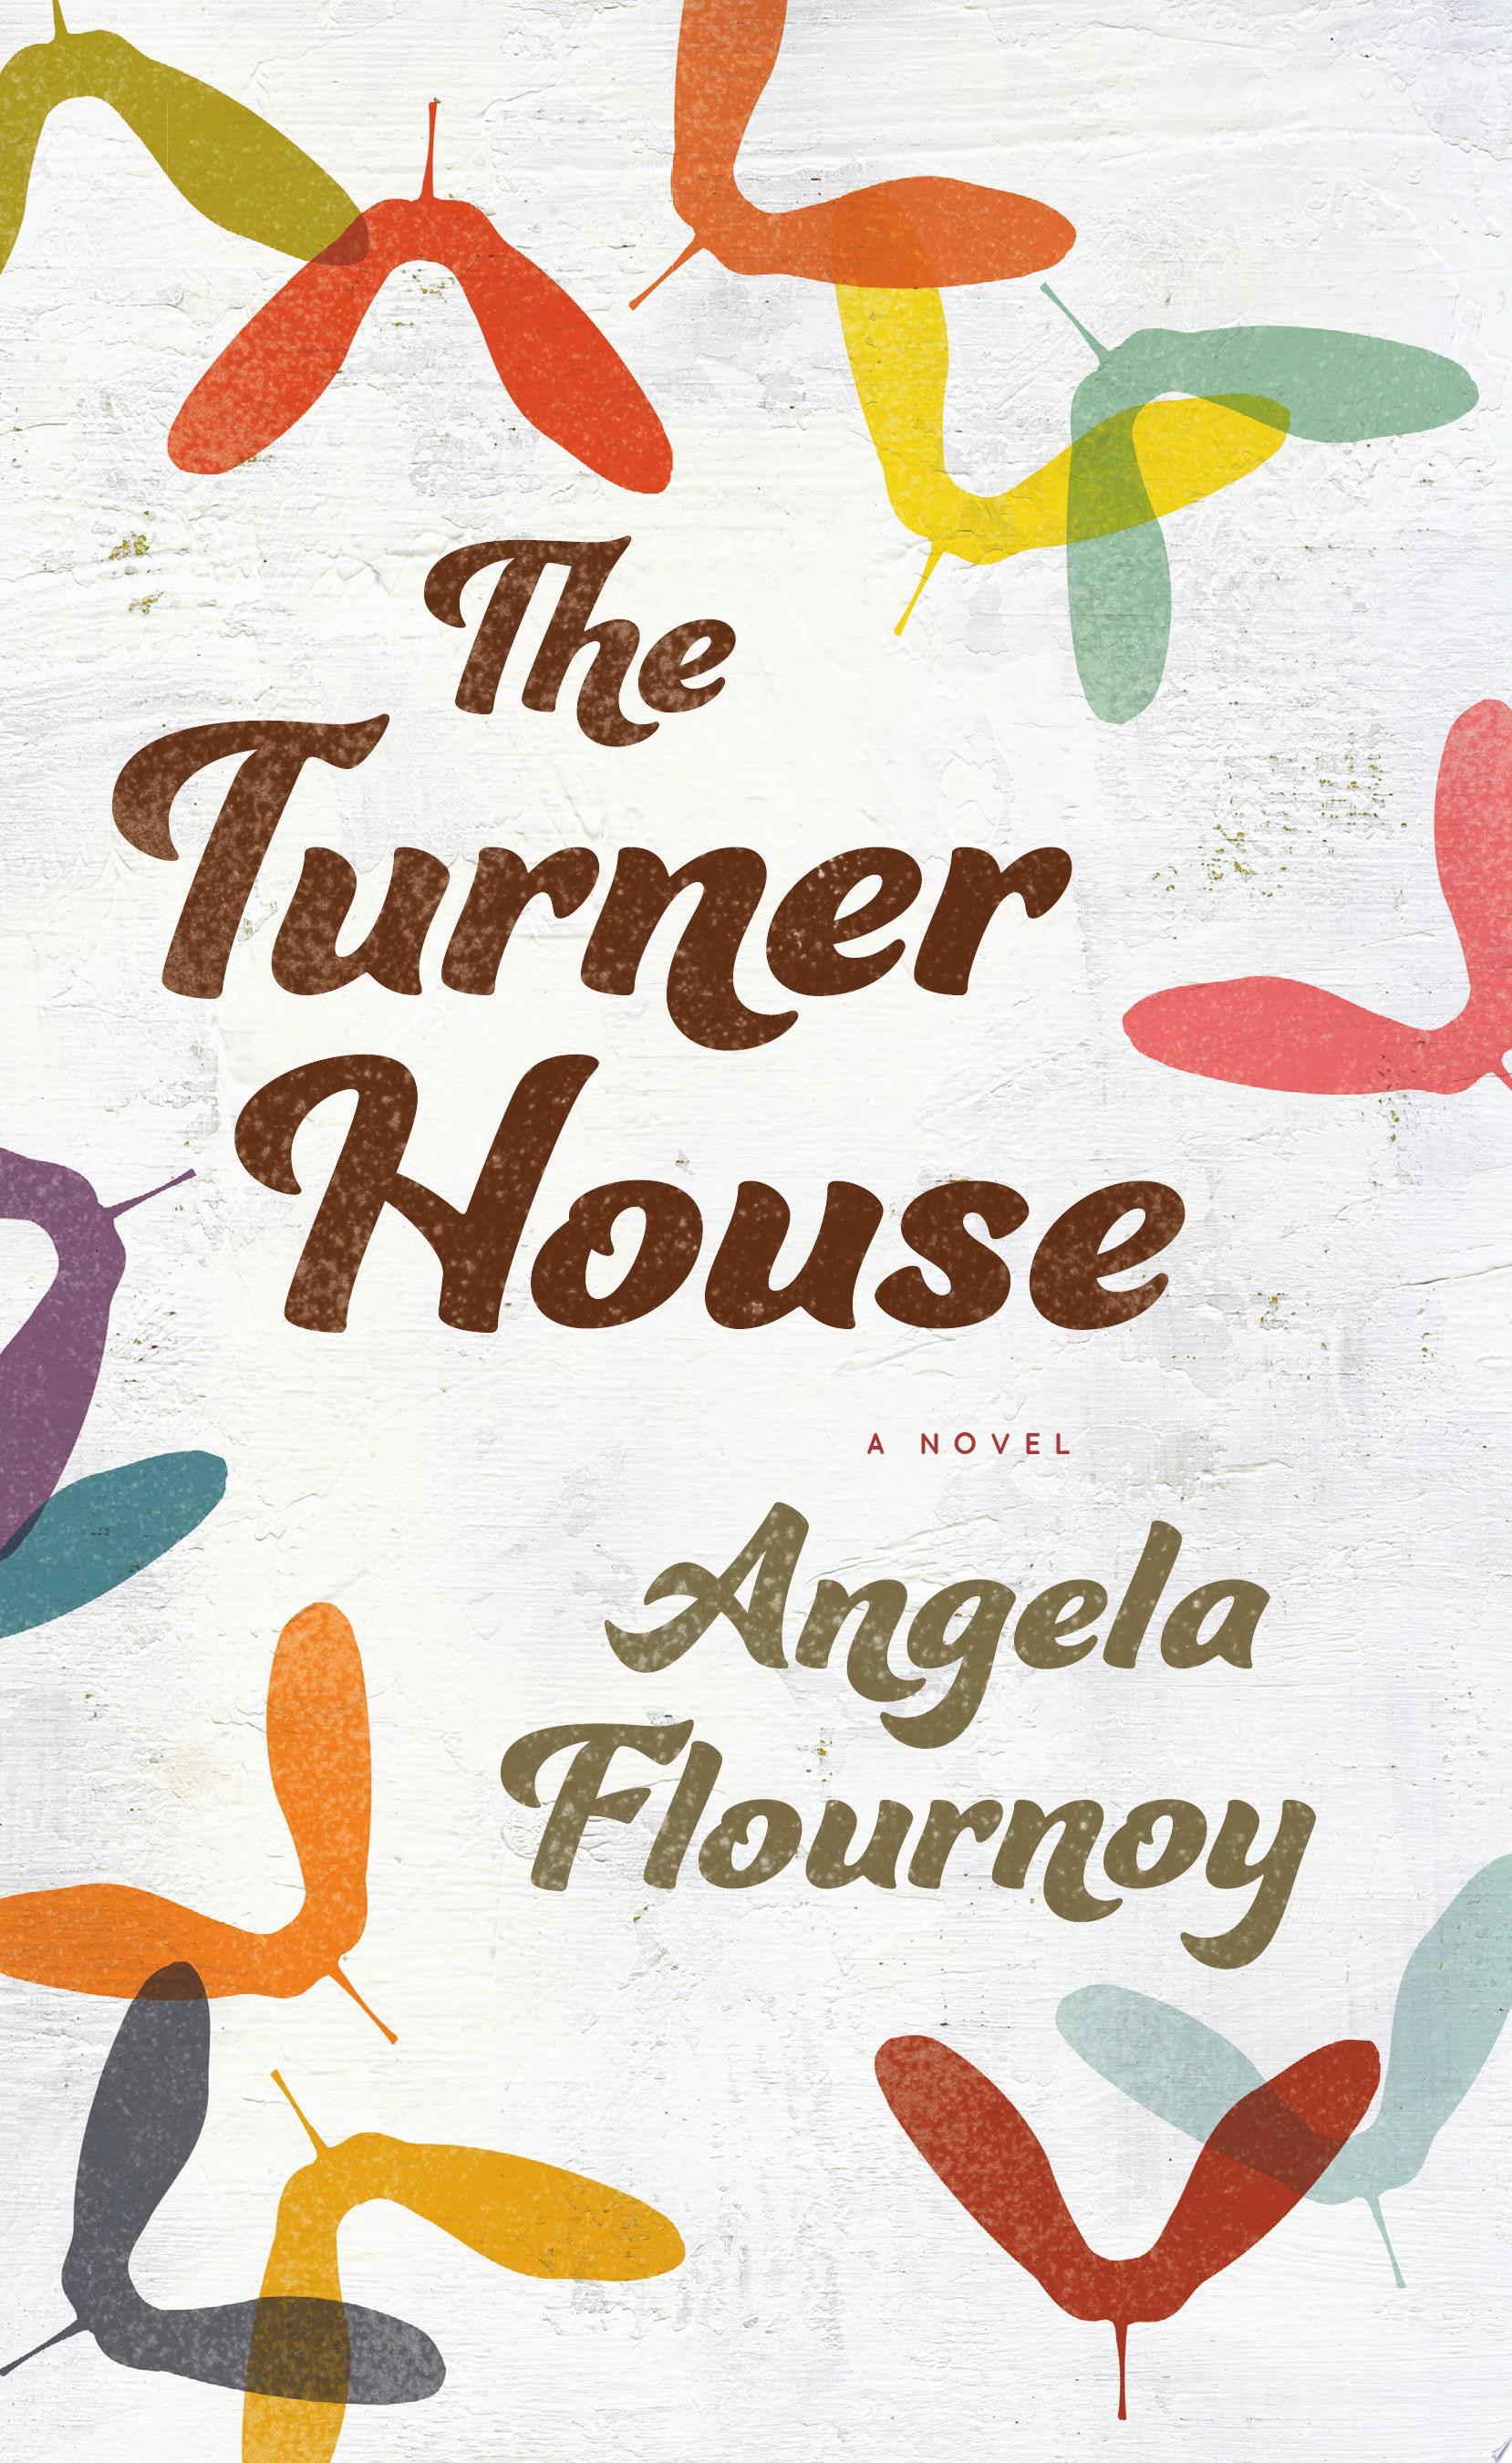 Image for "The Turner House"